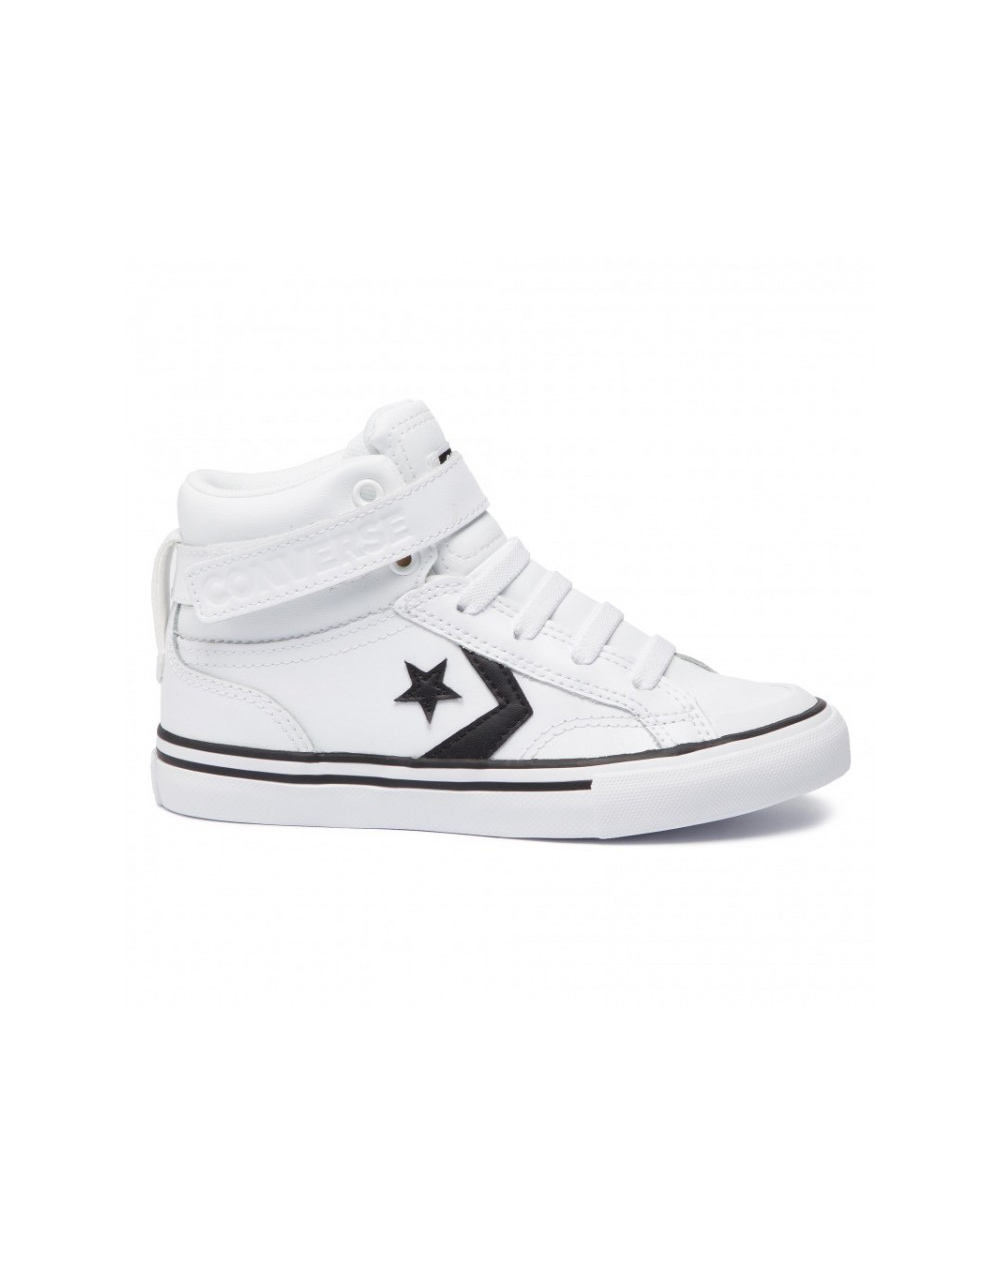 CONVERSE PRO BLAZE STRAP LEATHER YOUTH SHOES